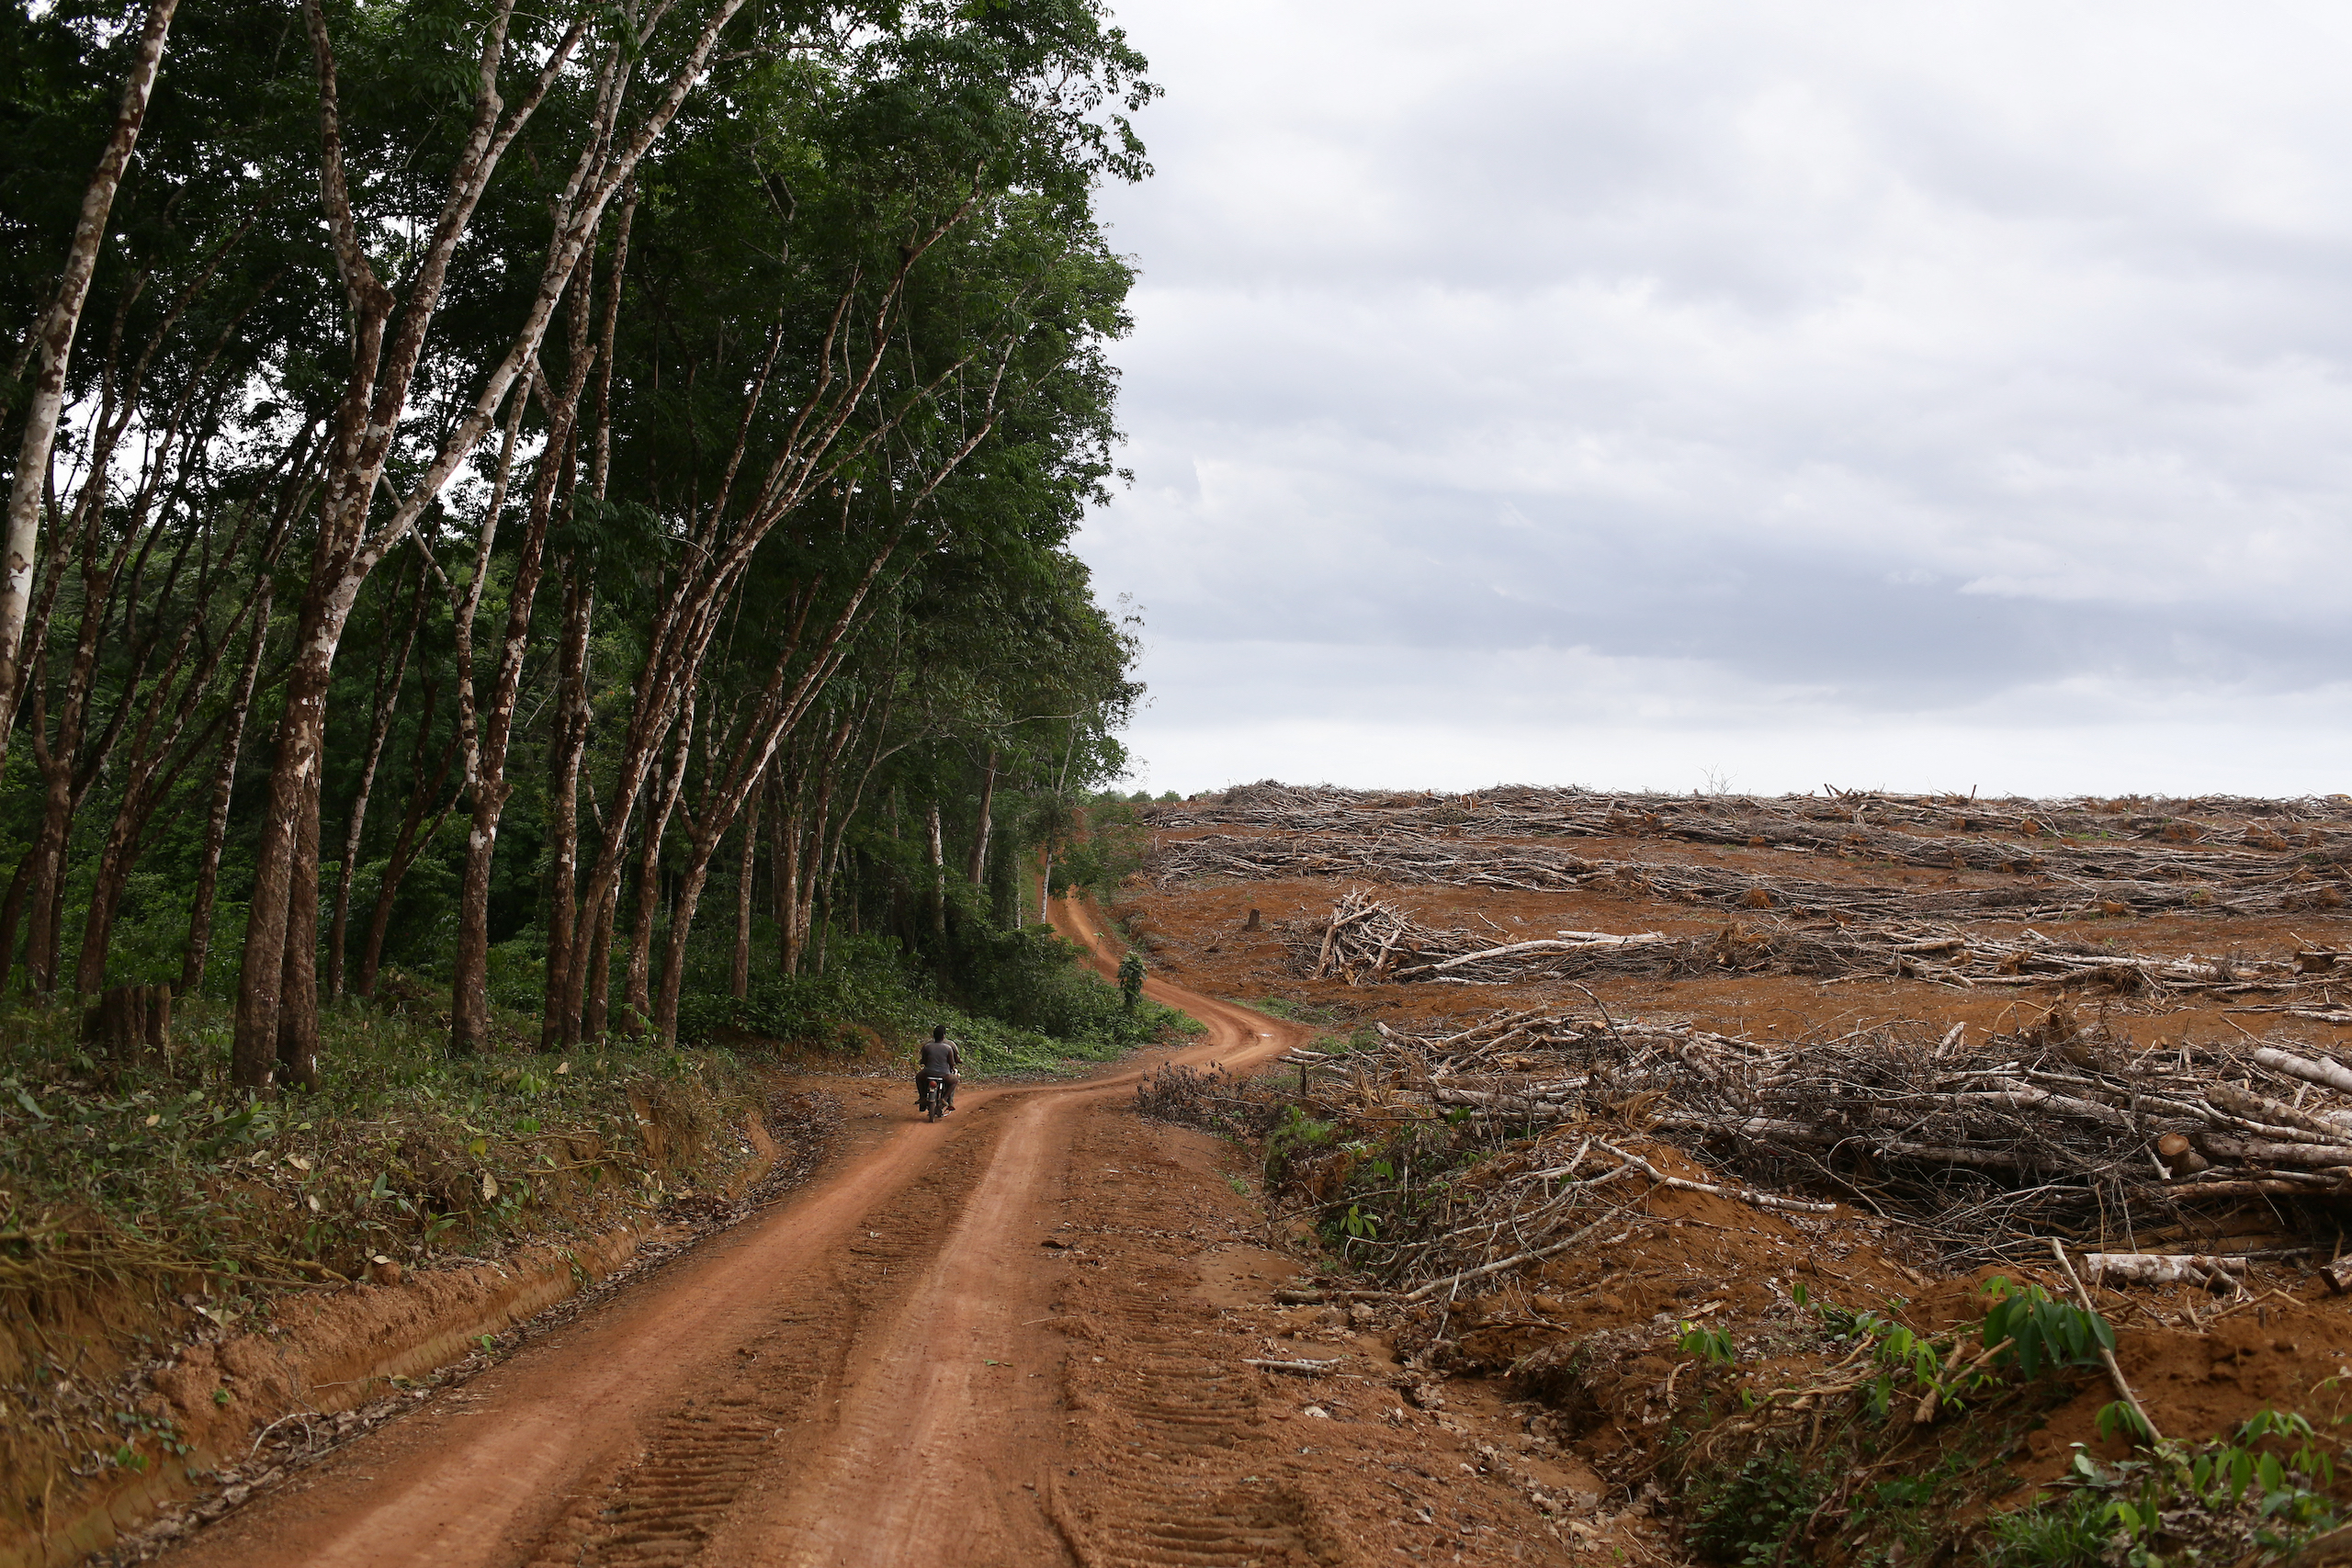 A rubber plantation in Cameroon